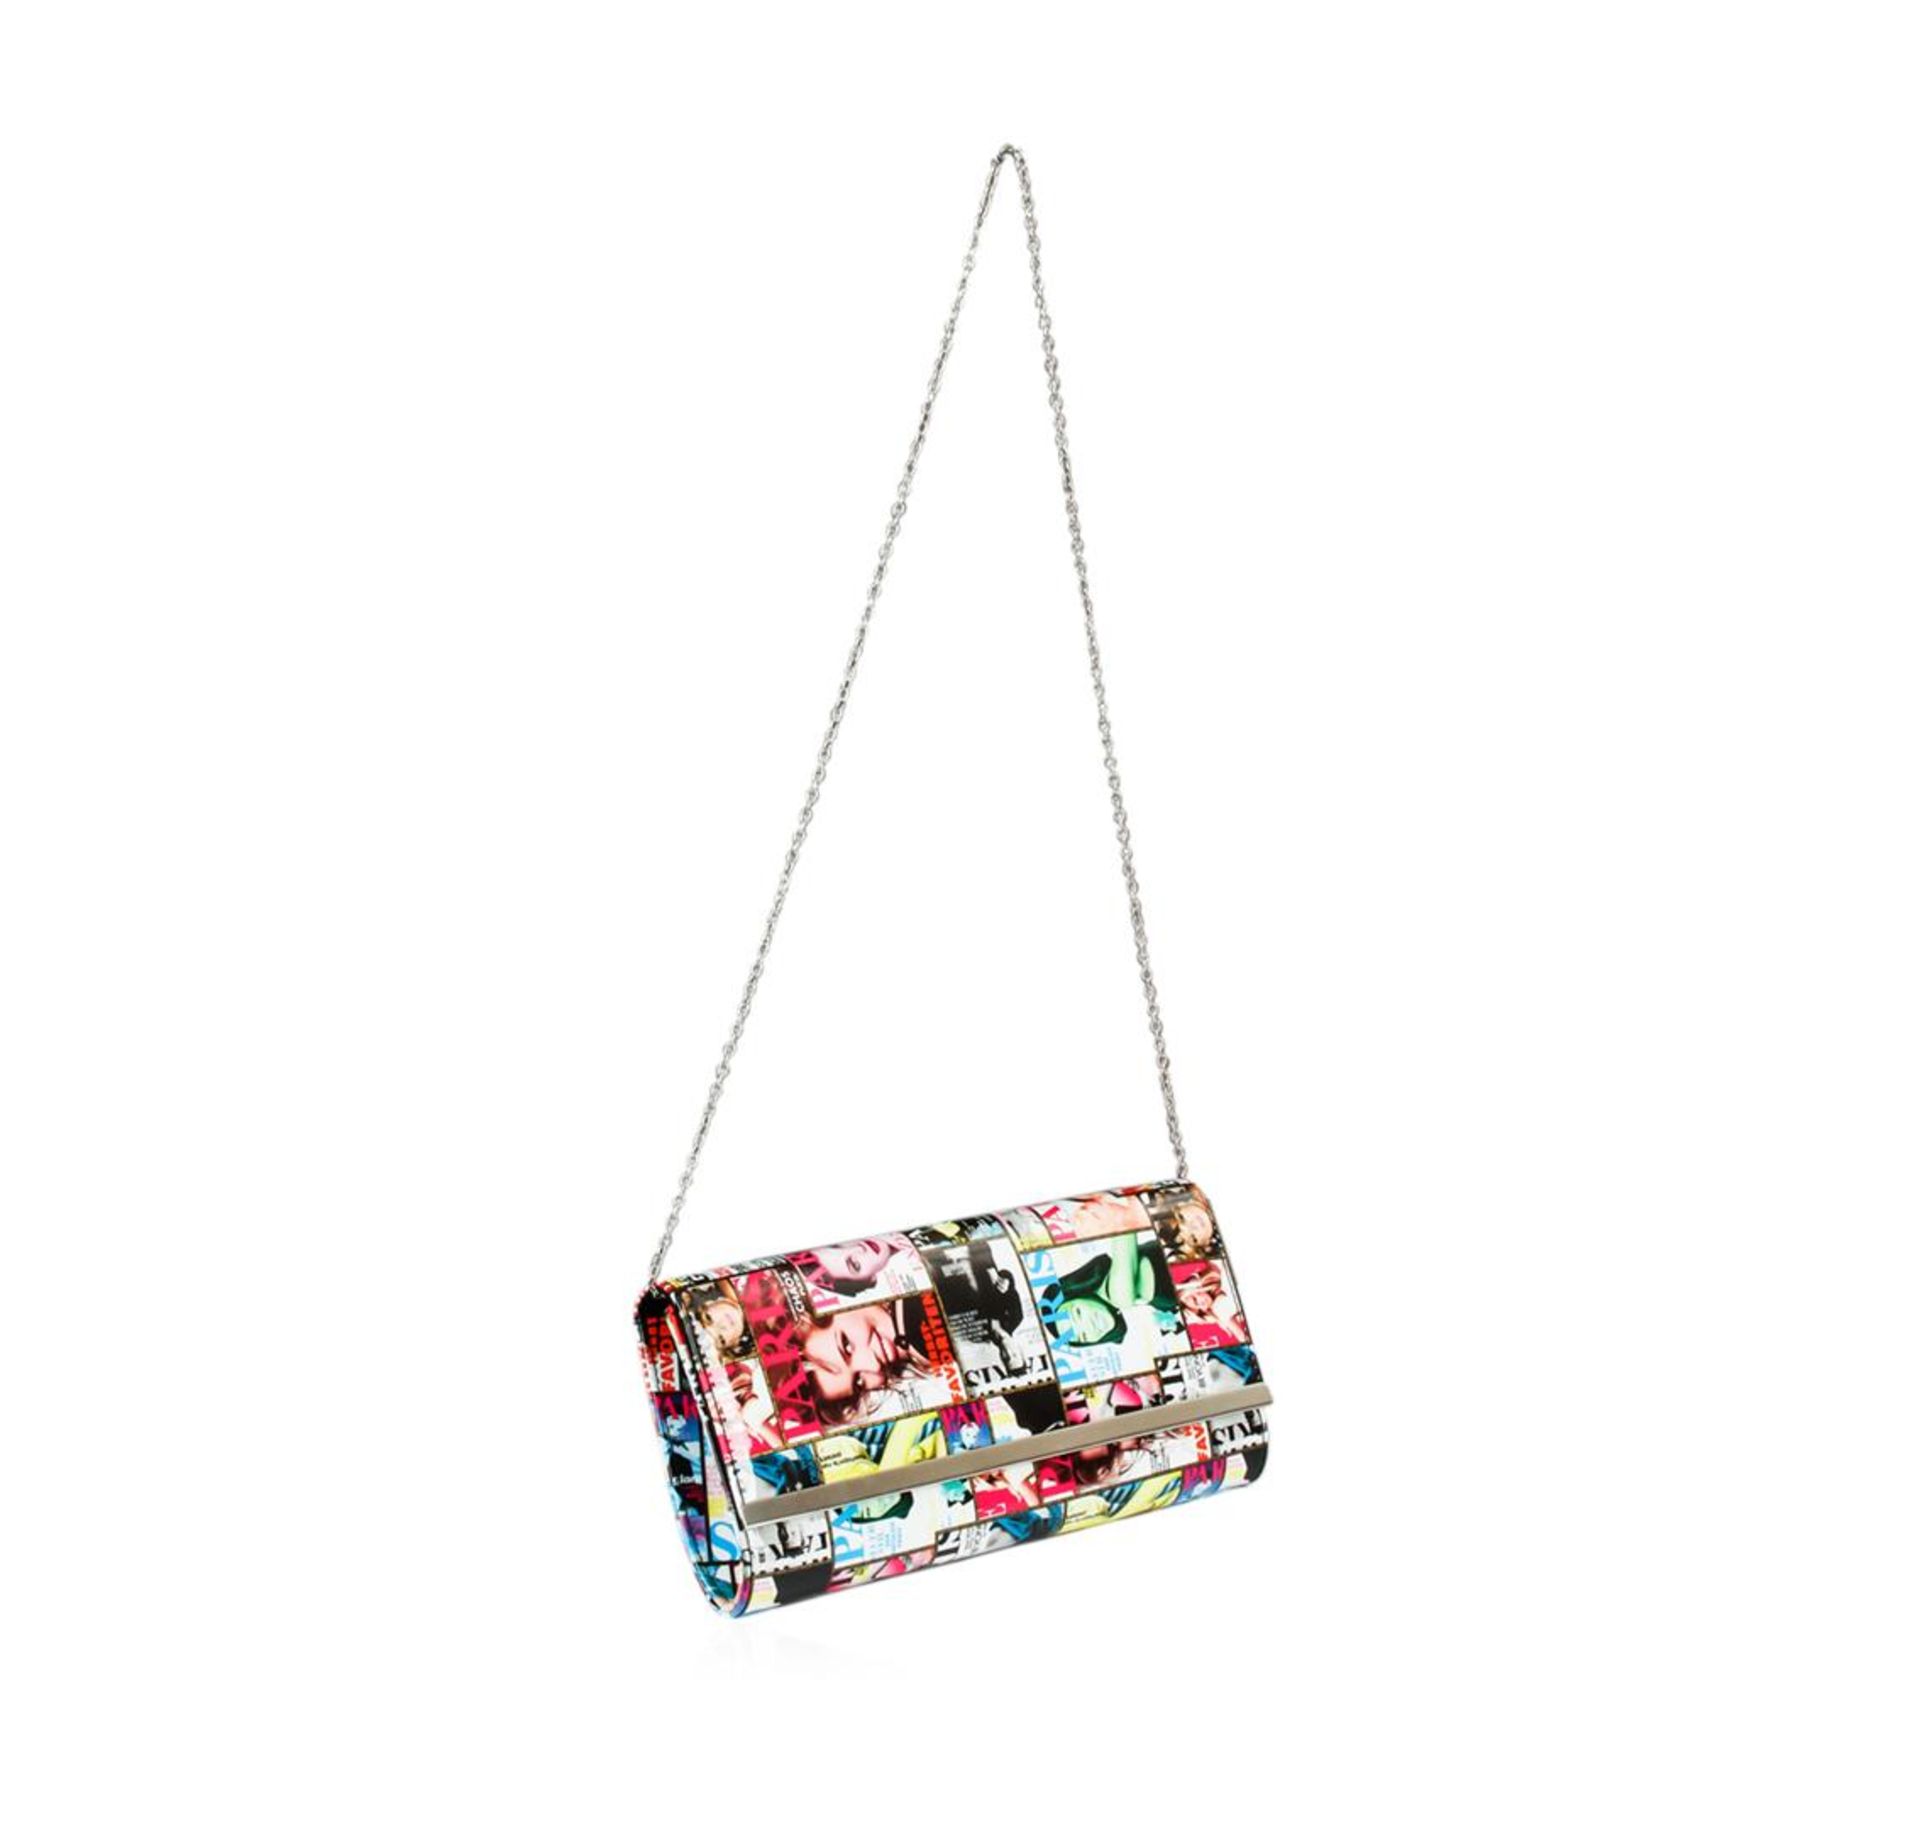 Multi Colored Fashionista Patent Oversized Clutch` - Image 3 of 3